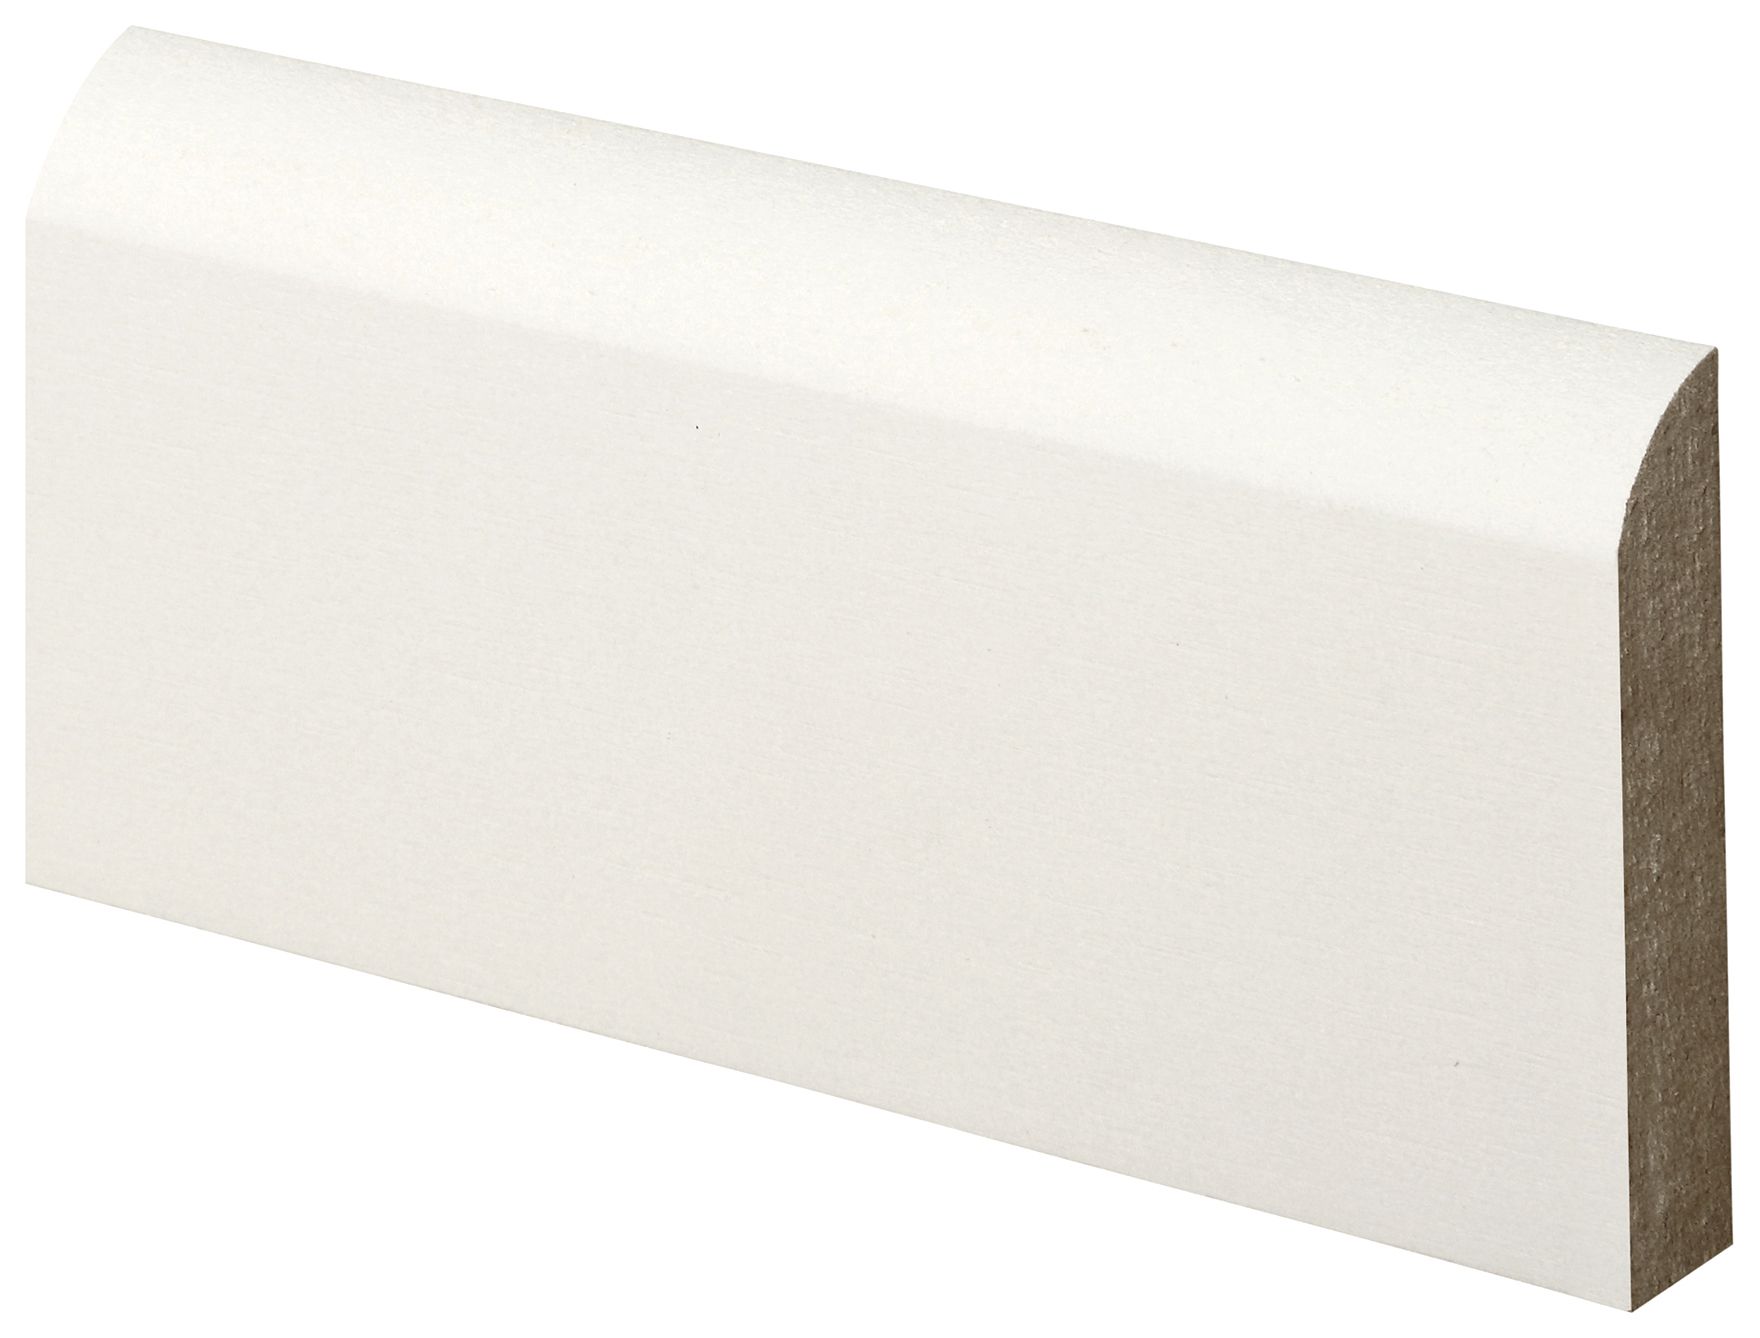 Image of Wickes Bullnose Primed MDF Architrave - 18mm x 69mm x 2.1m